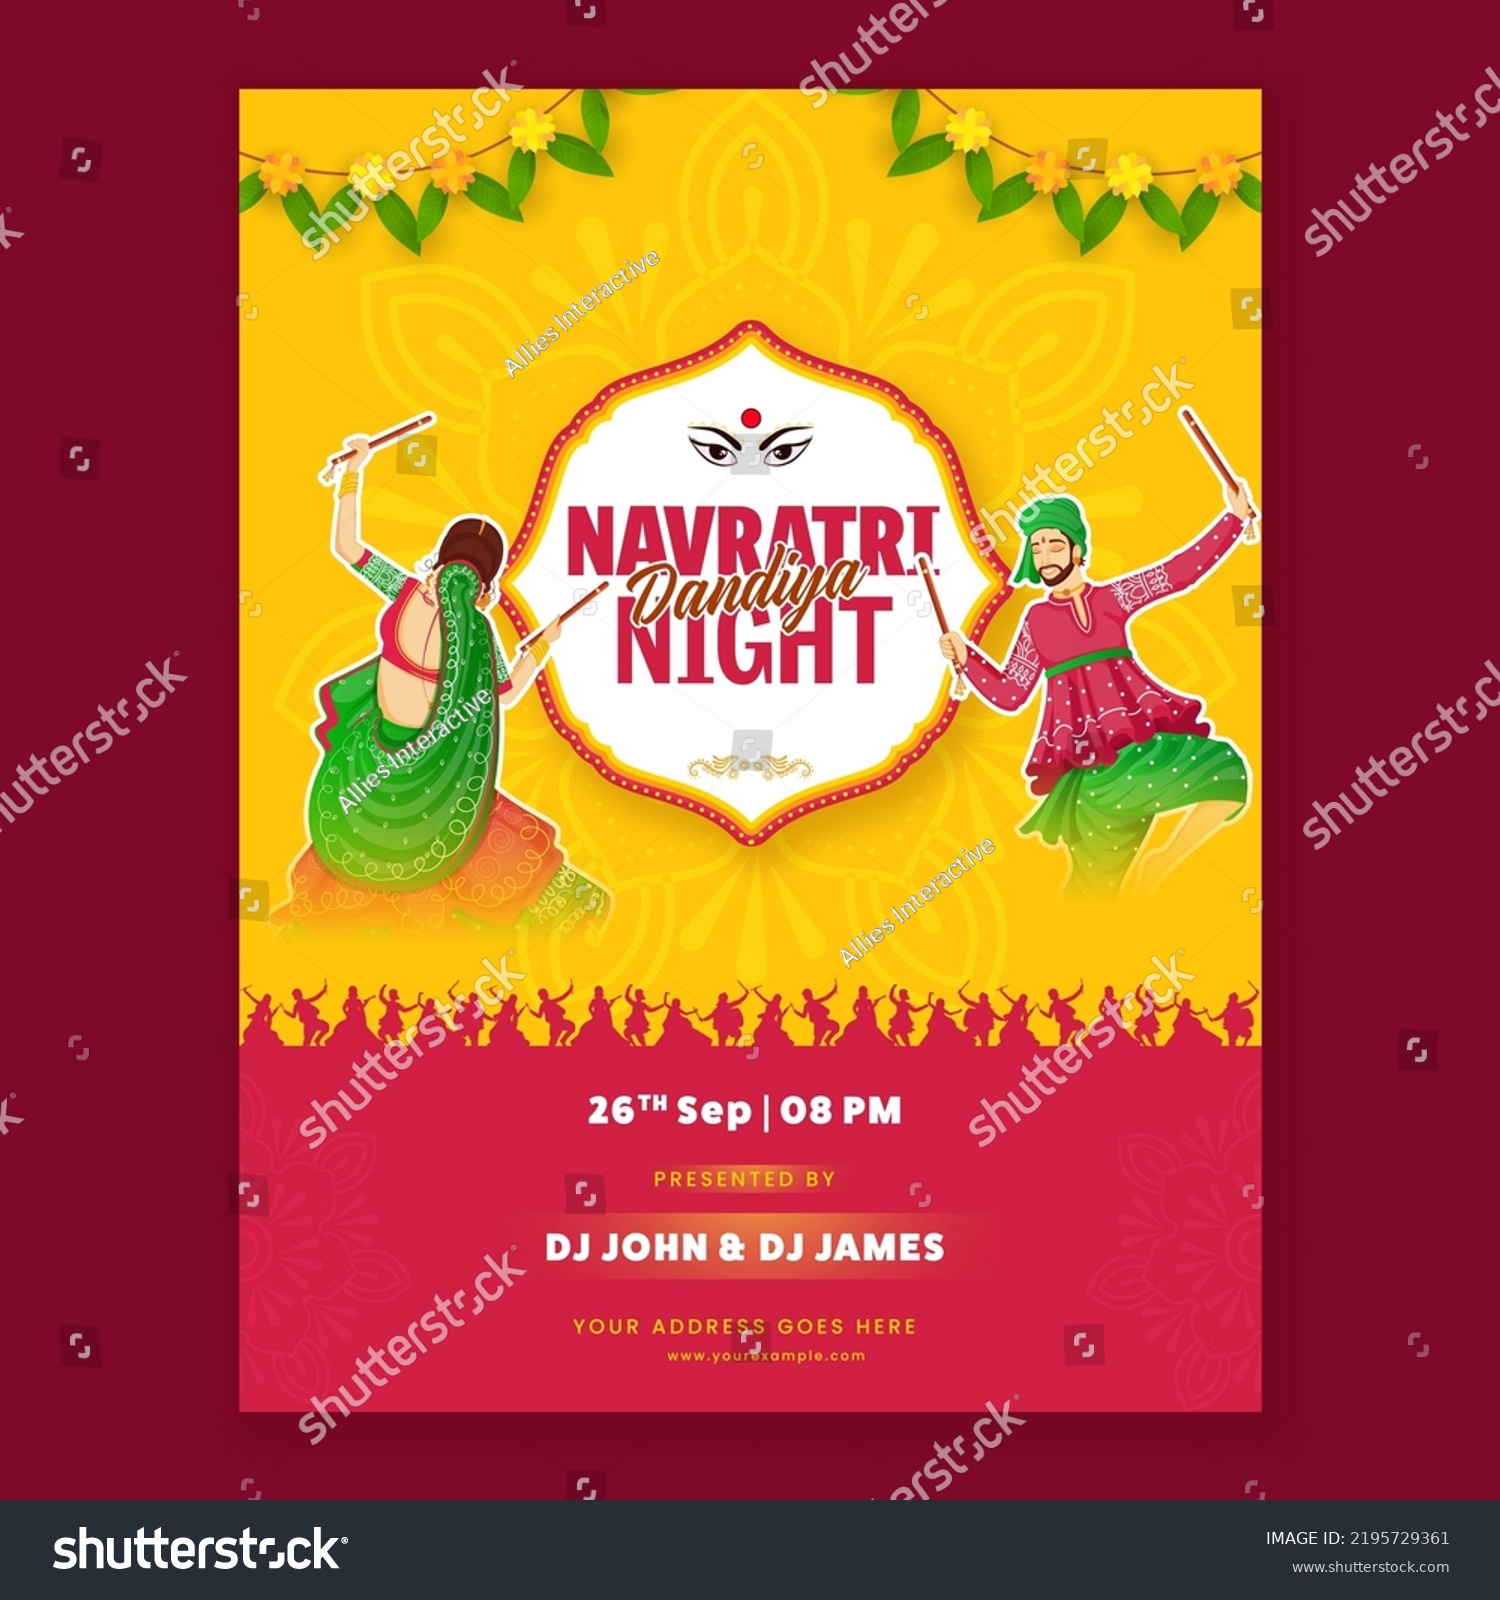 SVG of Navratri Dandiya Nights Party Invitation Card With Indian Couple Playing Dandiya In Sticker Style And Event Details. svg